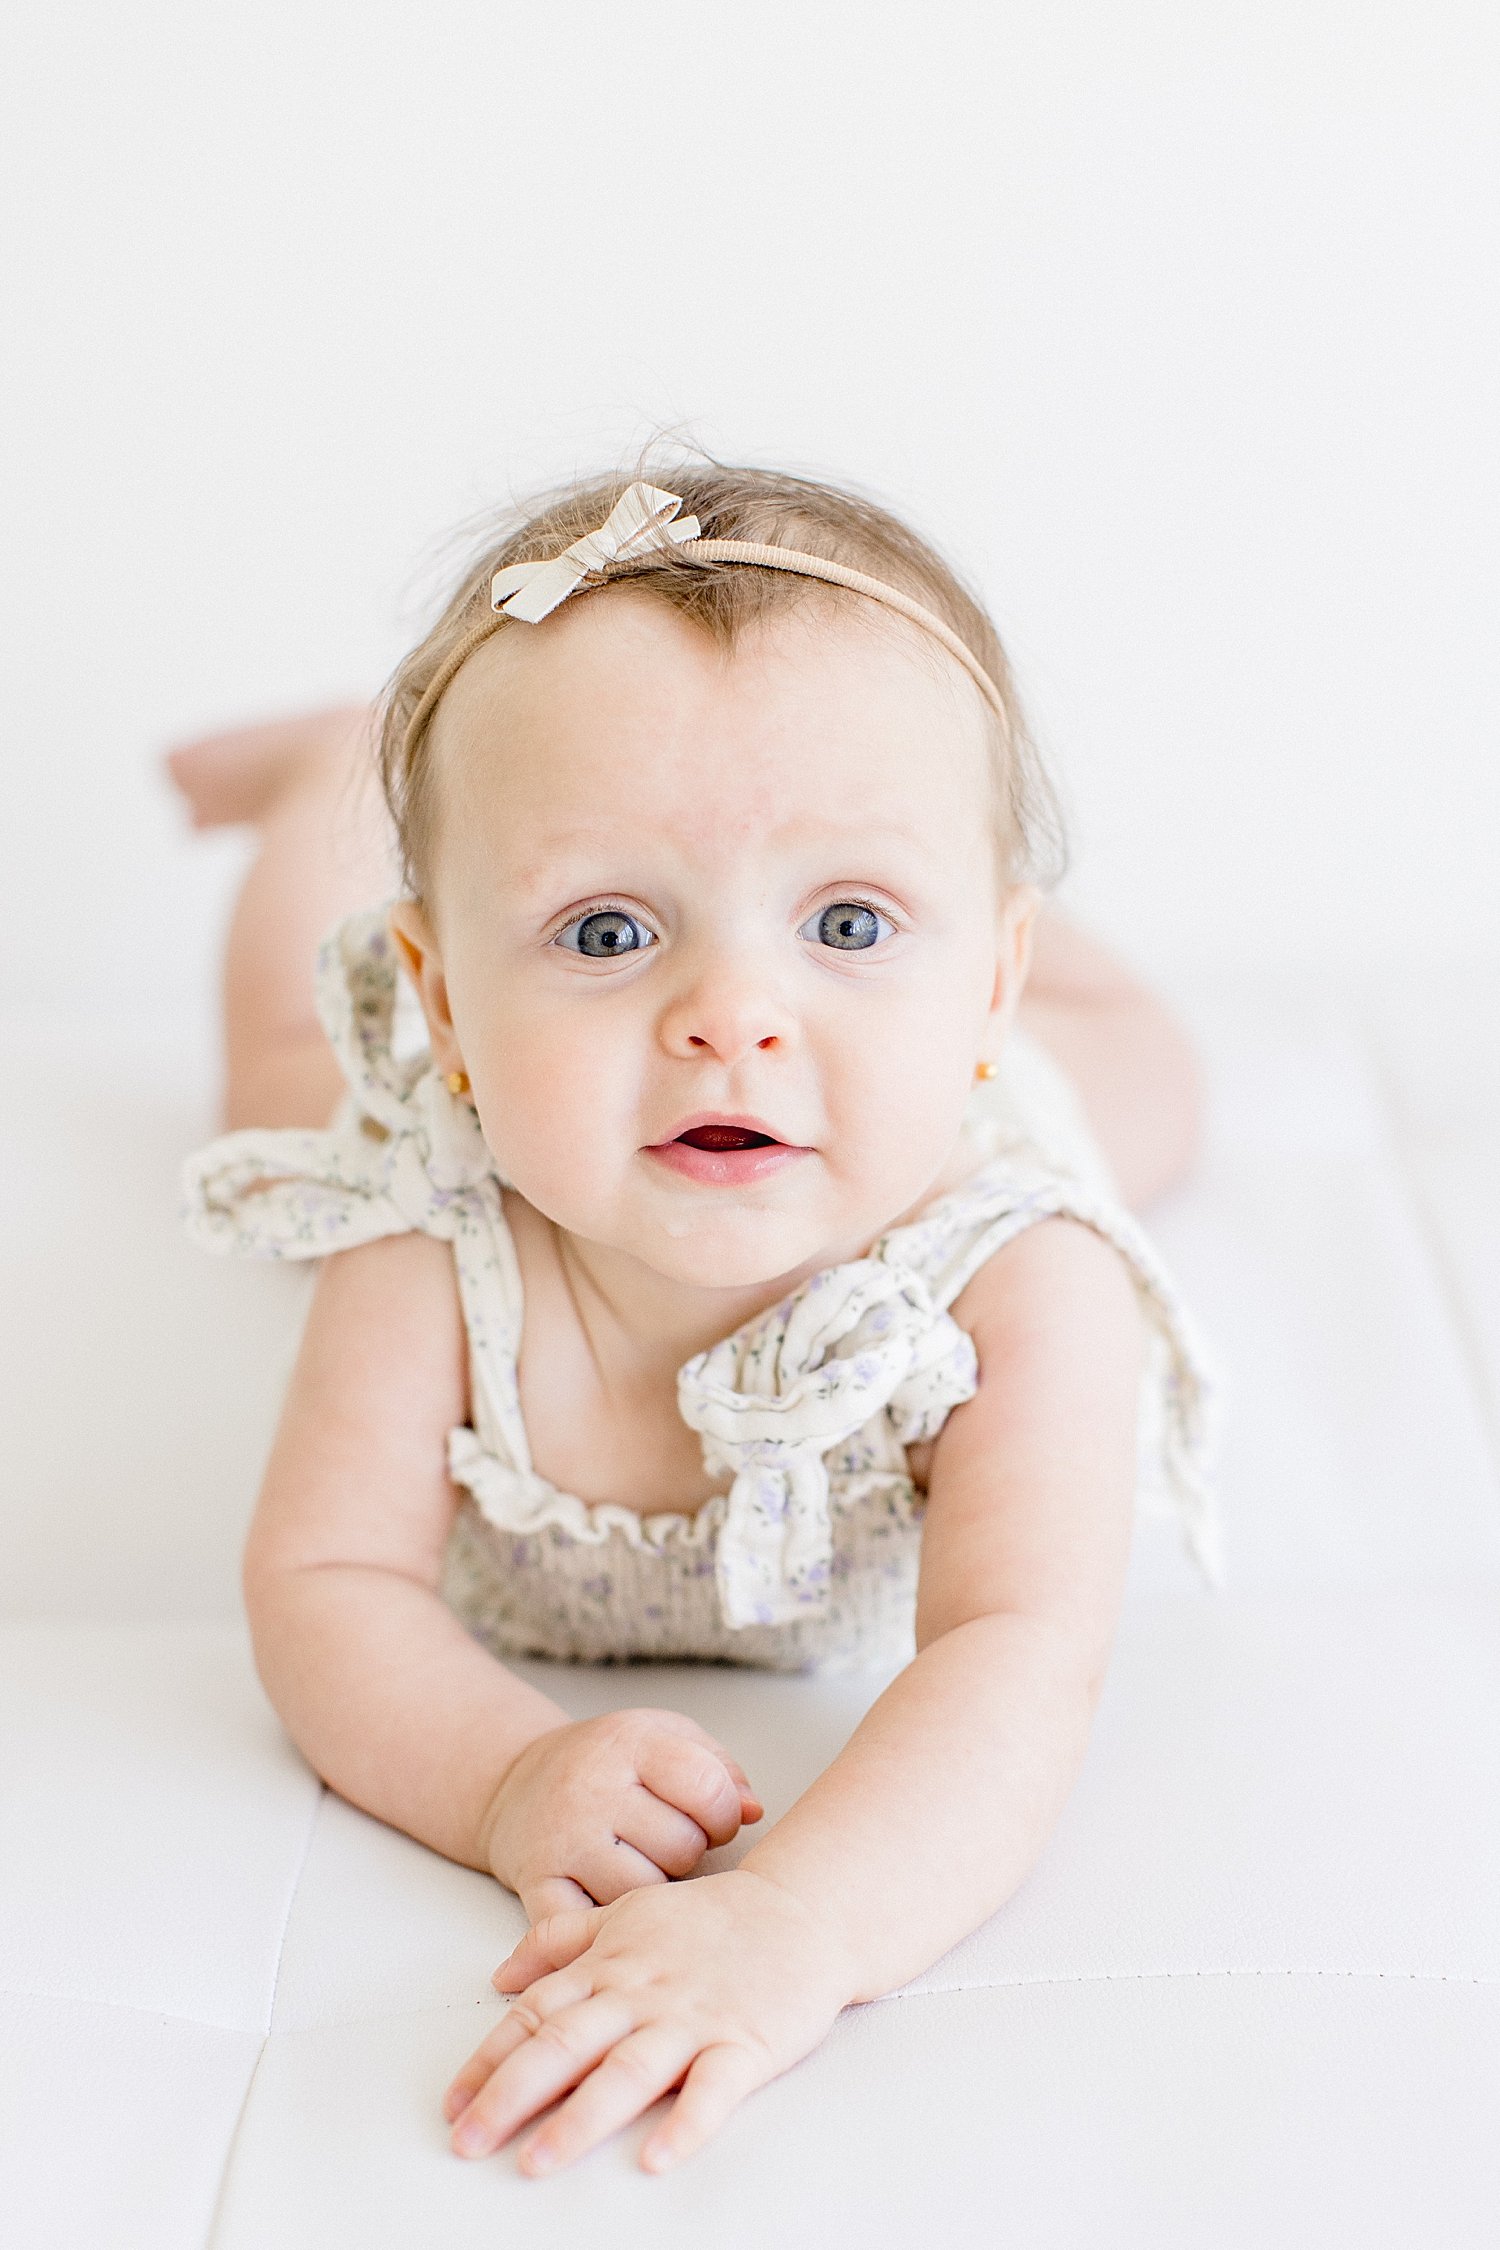 Baby girl hairstyles - Page 6 | BabyCenter